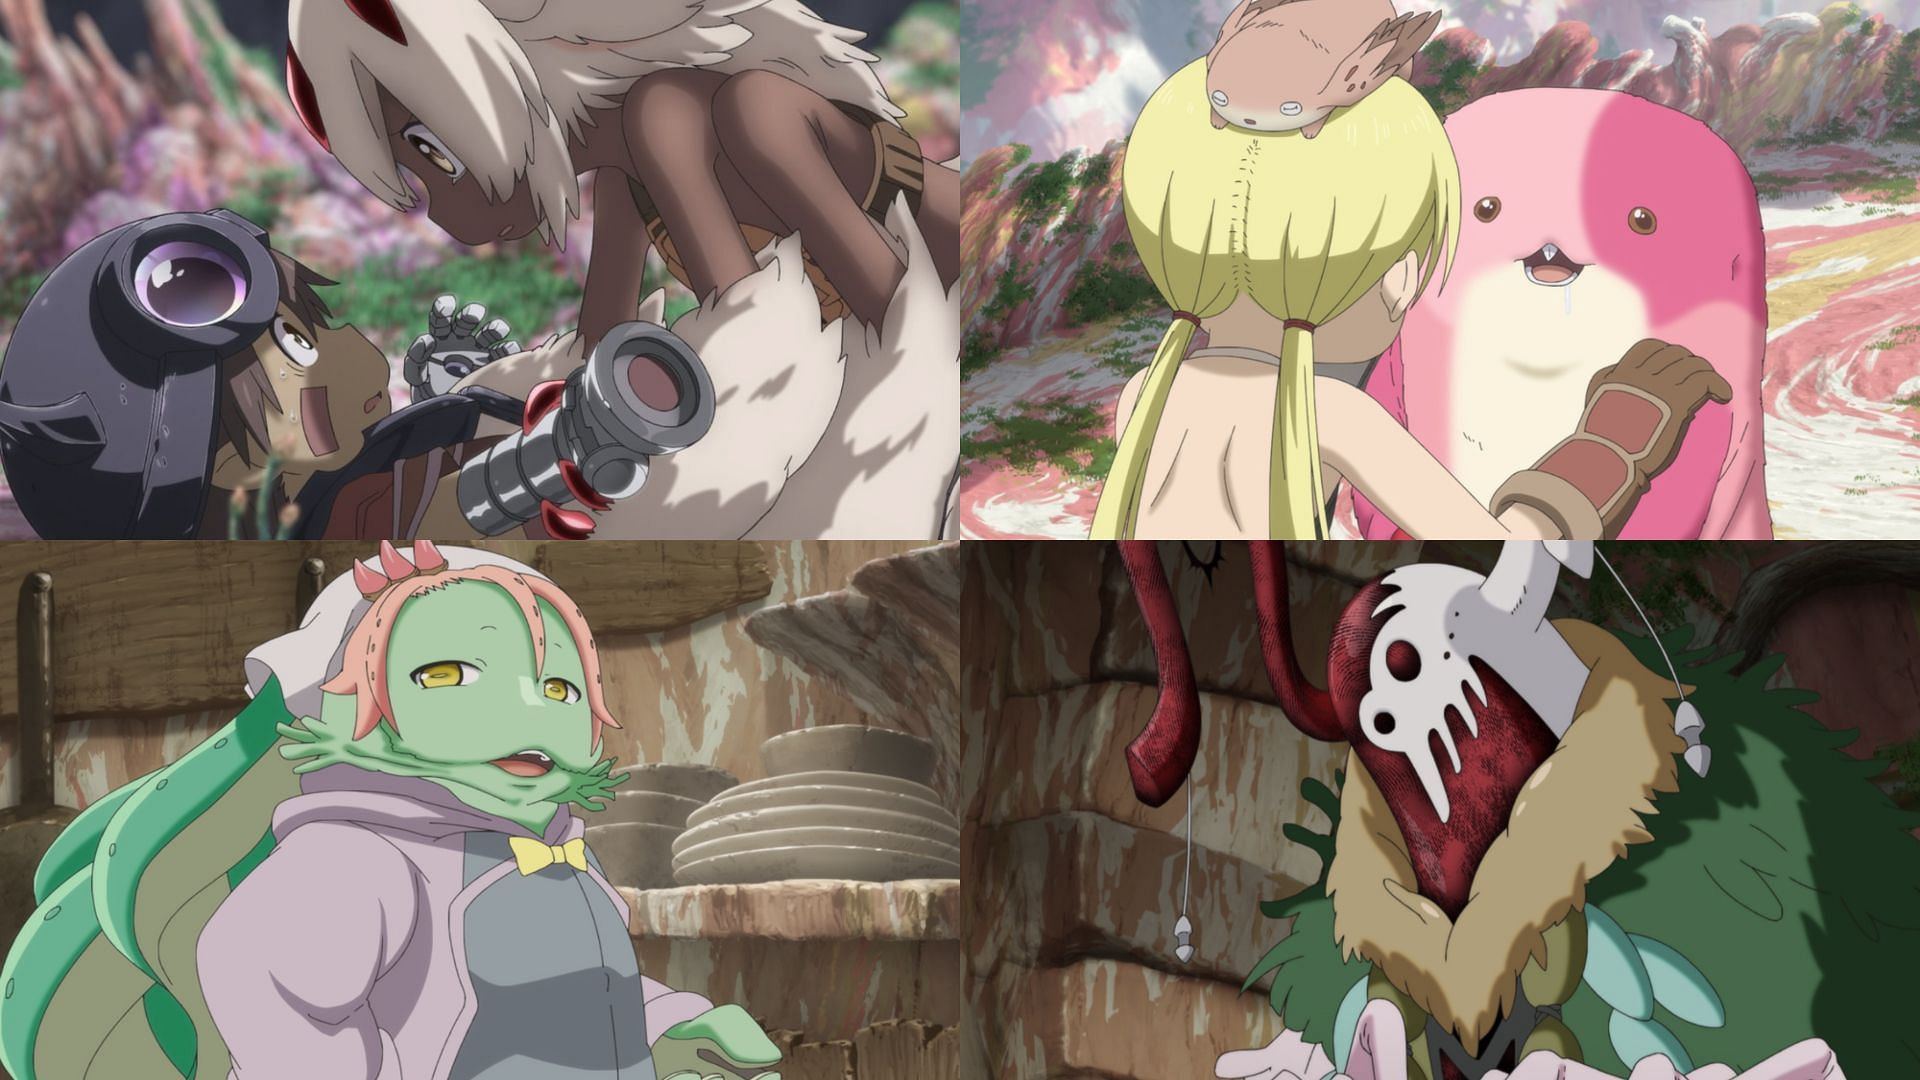 Made in Abyss Season 2 Episode 1 - Anime Episode Review